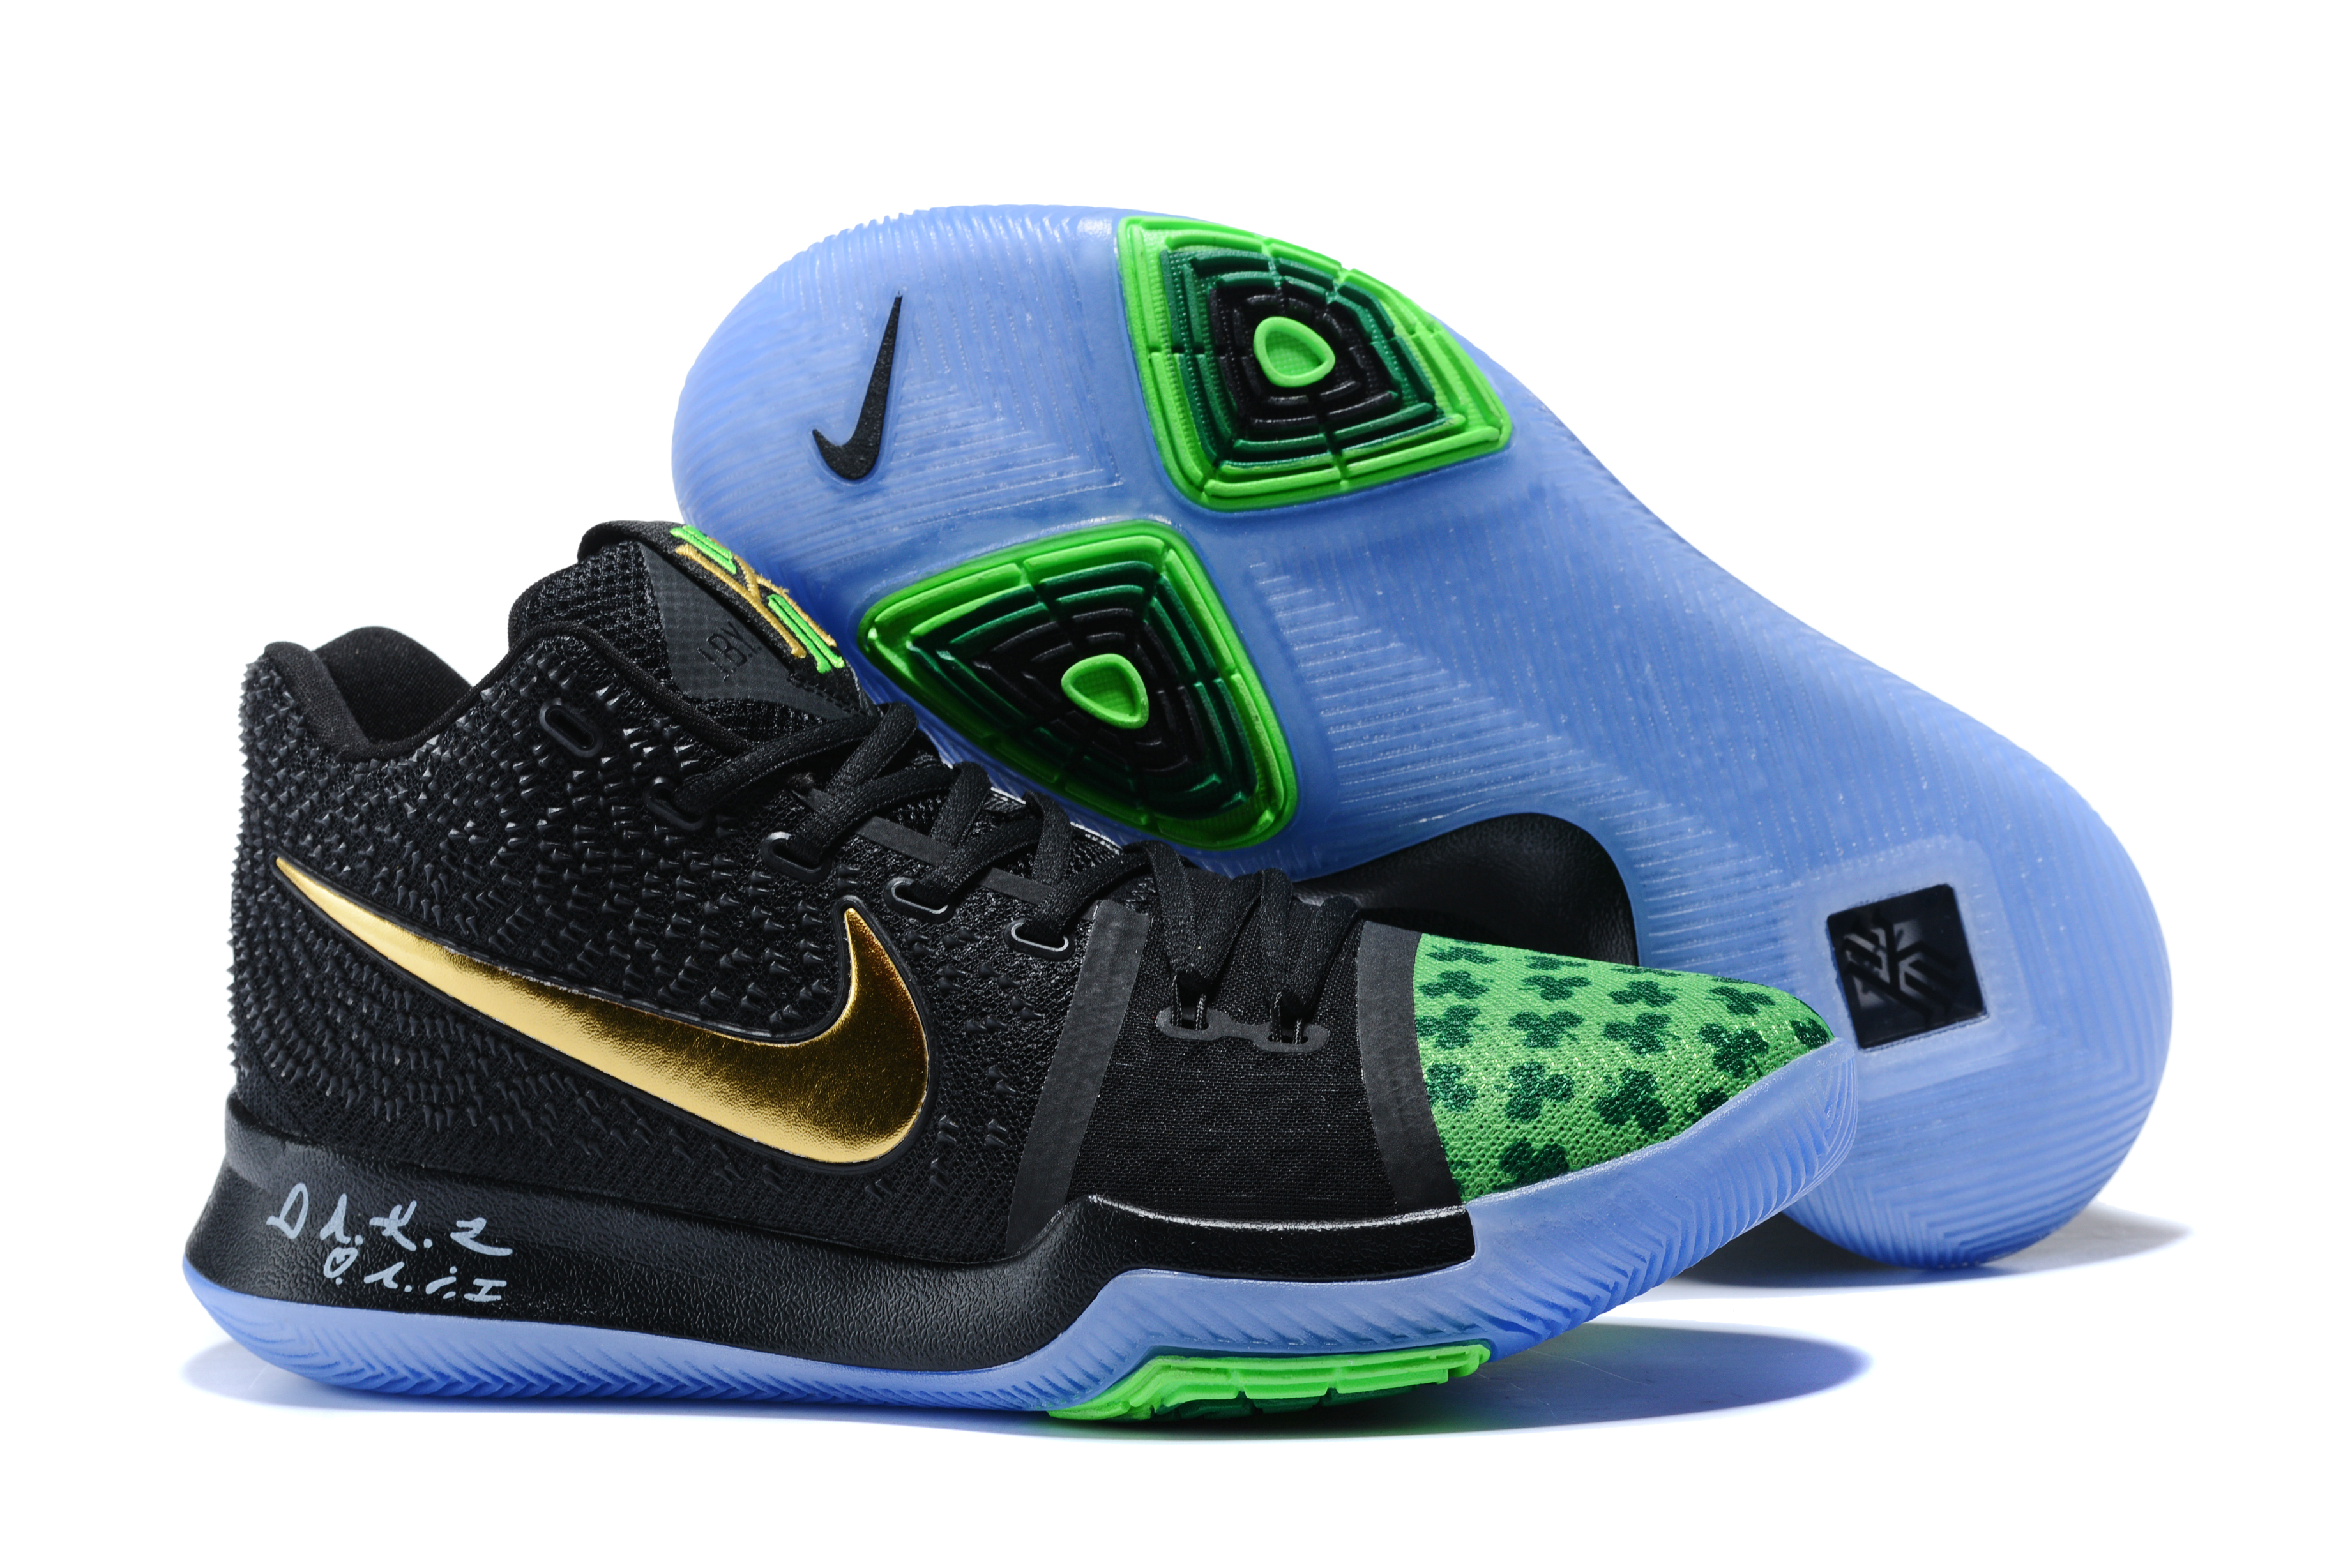 New Nike Kyire 3 Clover Theme Basketball Shoes